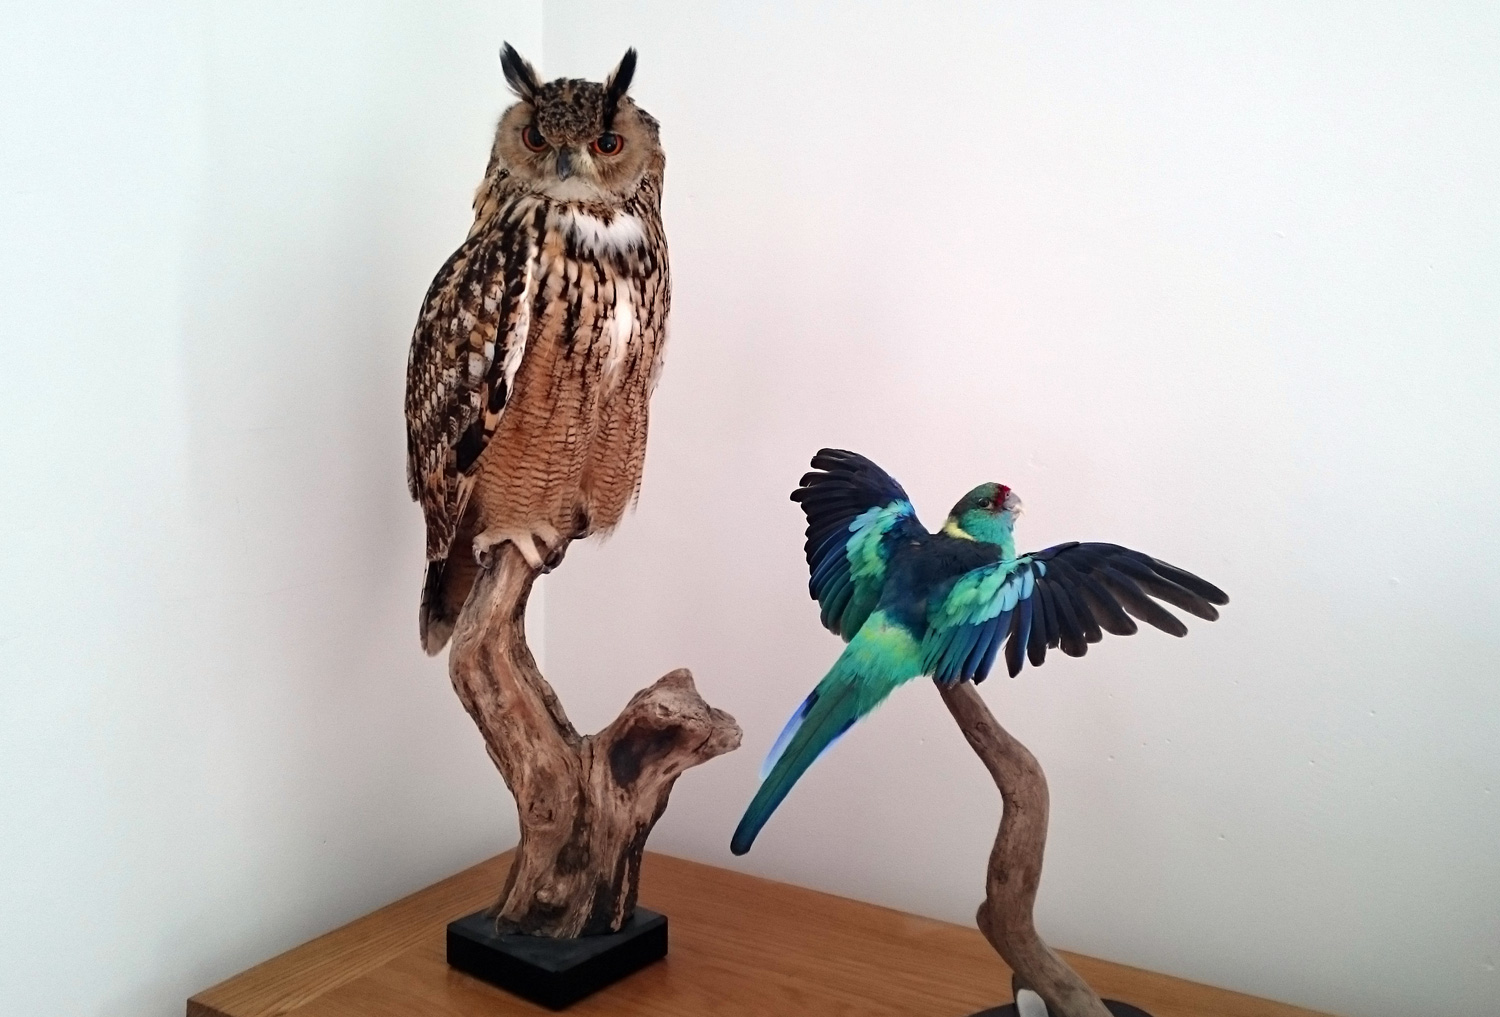 Bengal eagle owl and Rosella parakeet taxidermy